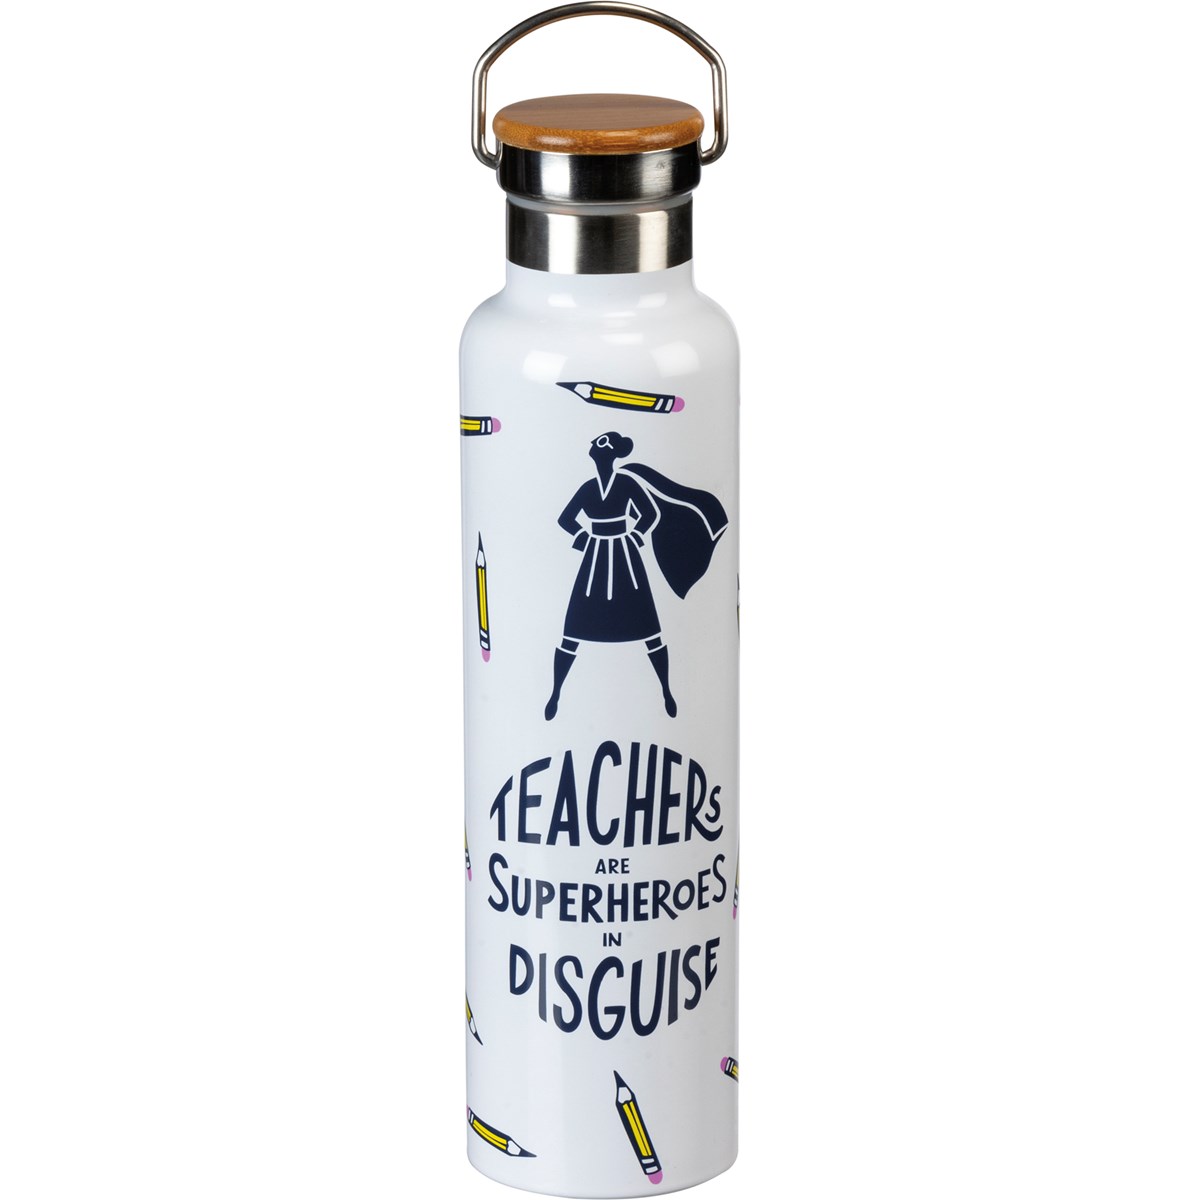 Teachers Are Superheroes Insulated Bottle - Stainless Steel, Bamboo